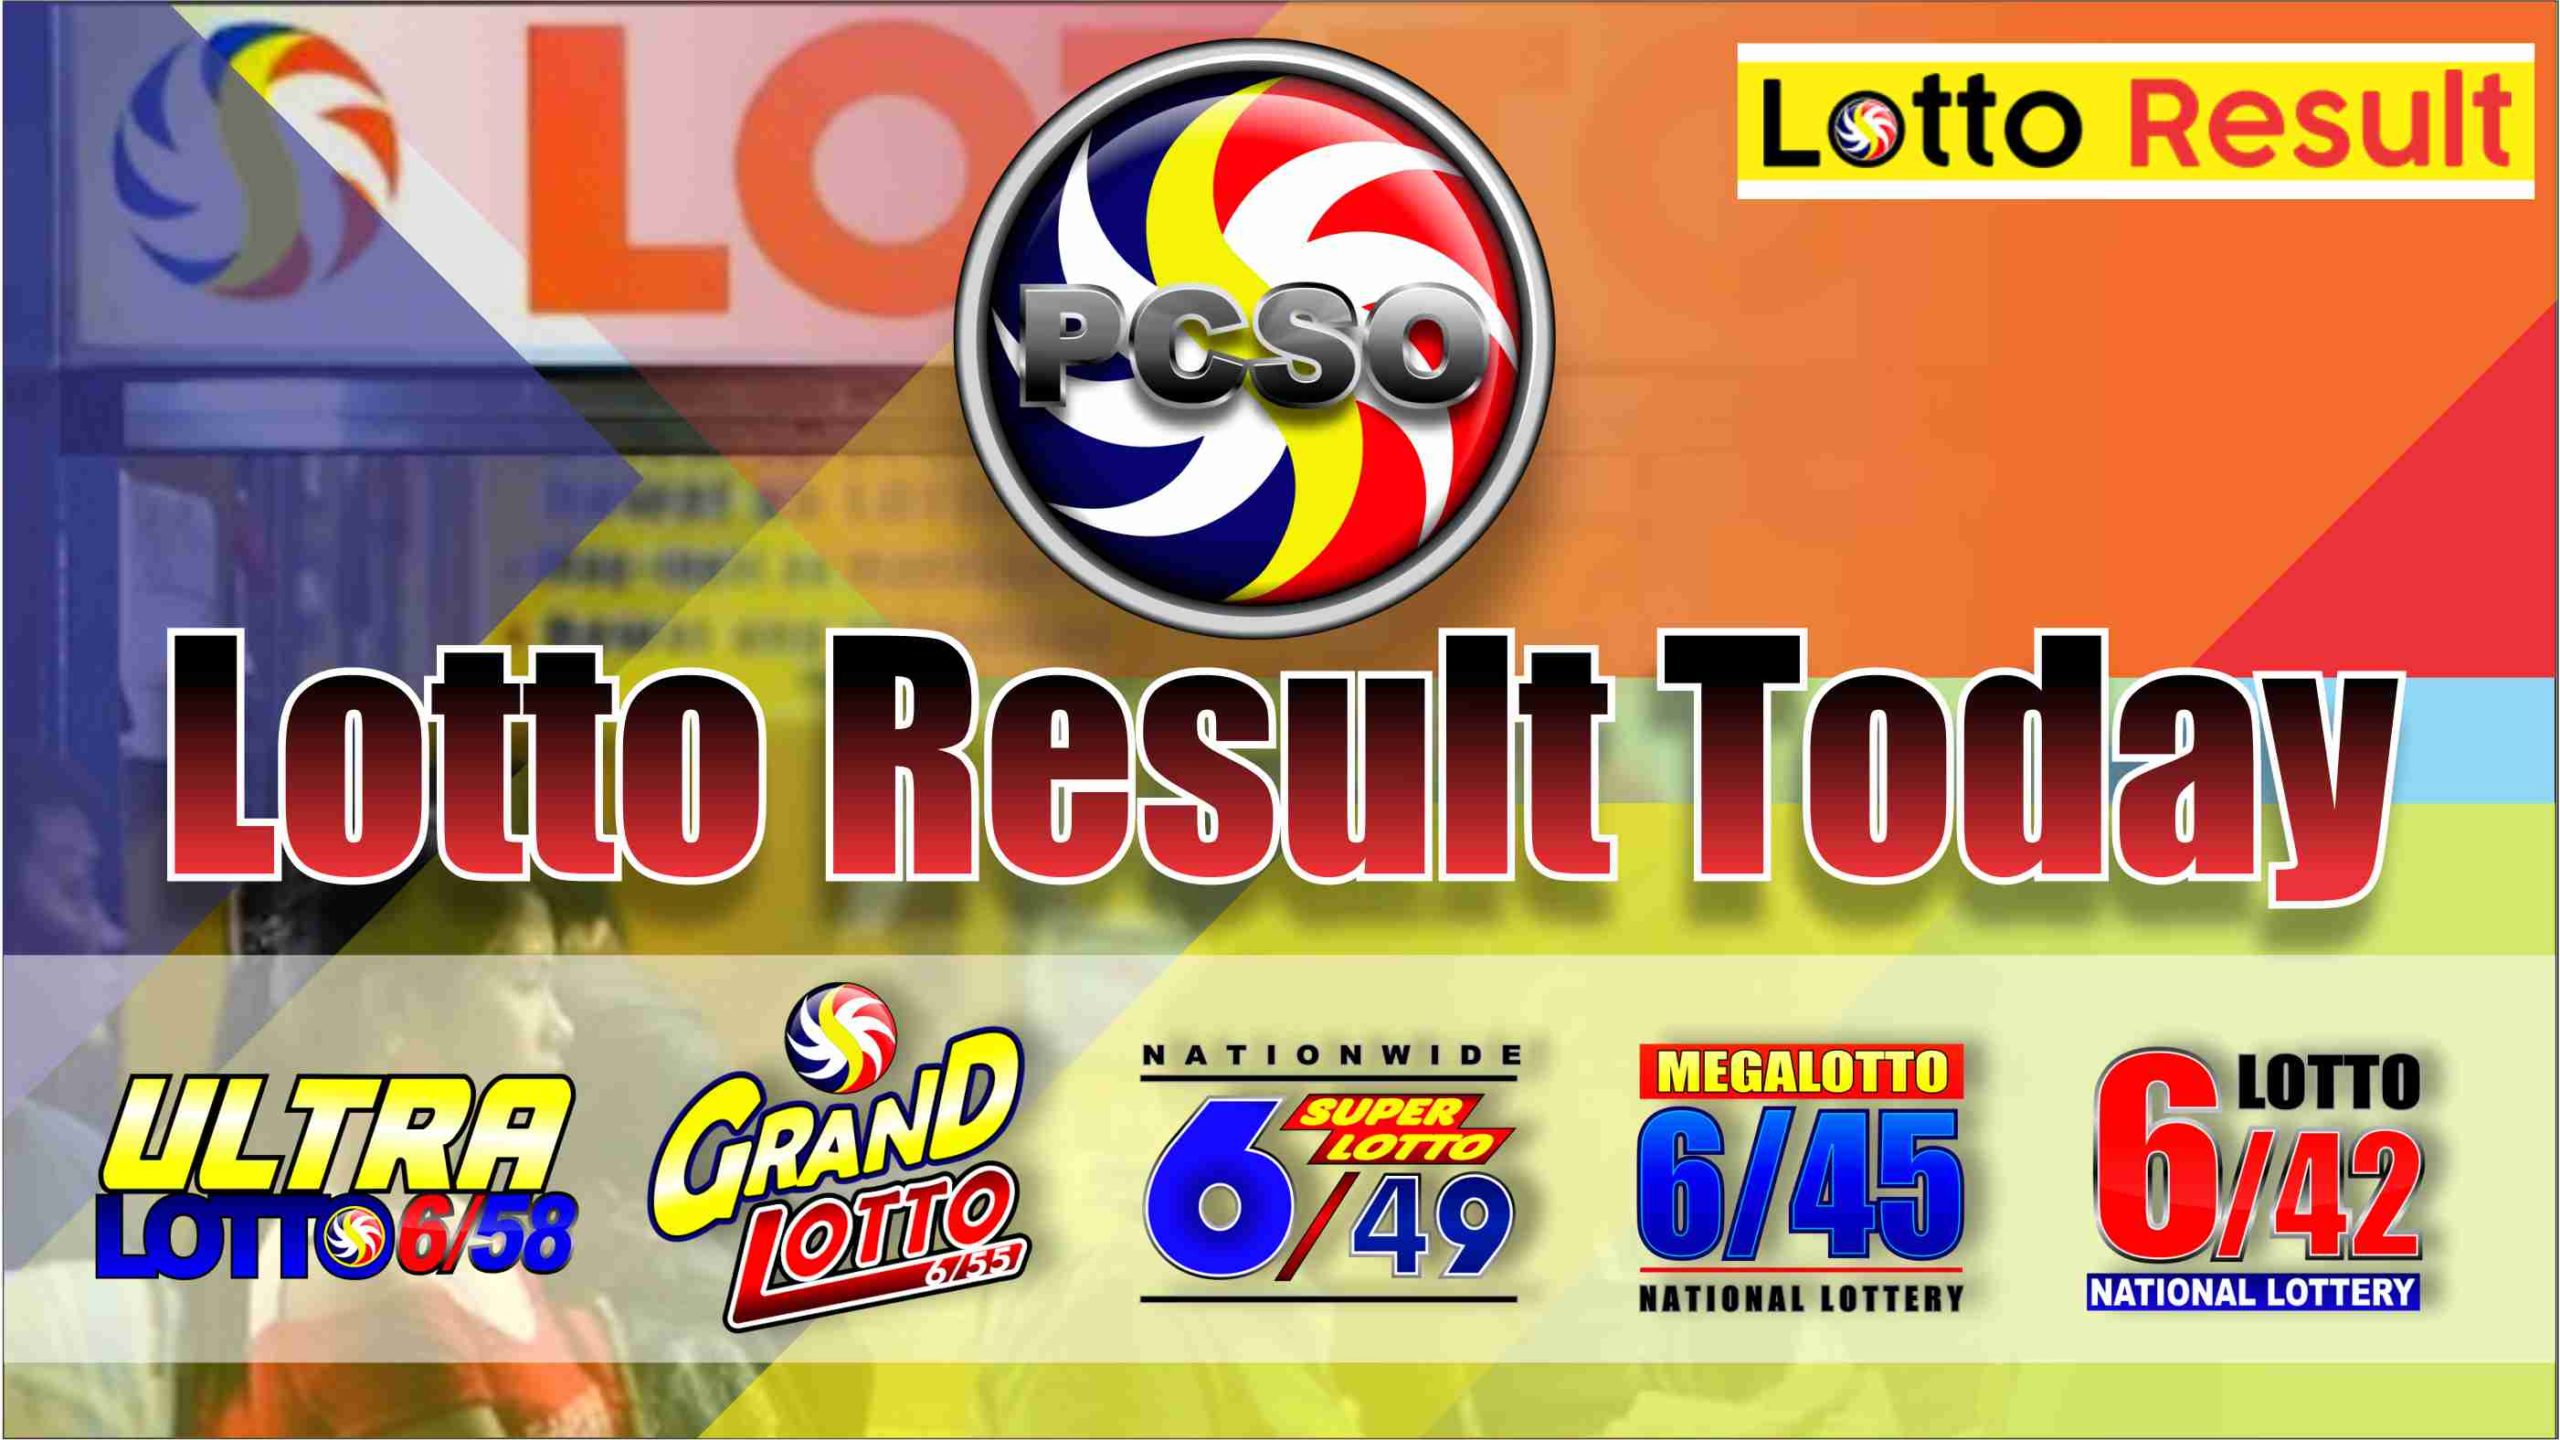 lotto-result-today-friday-july-8-2022-6-58-6-45-official-pcso